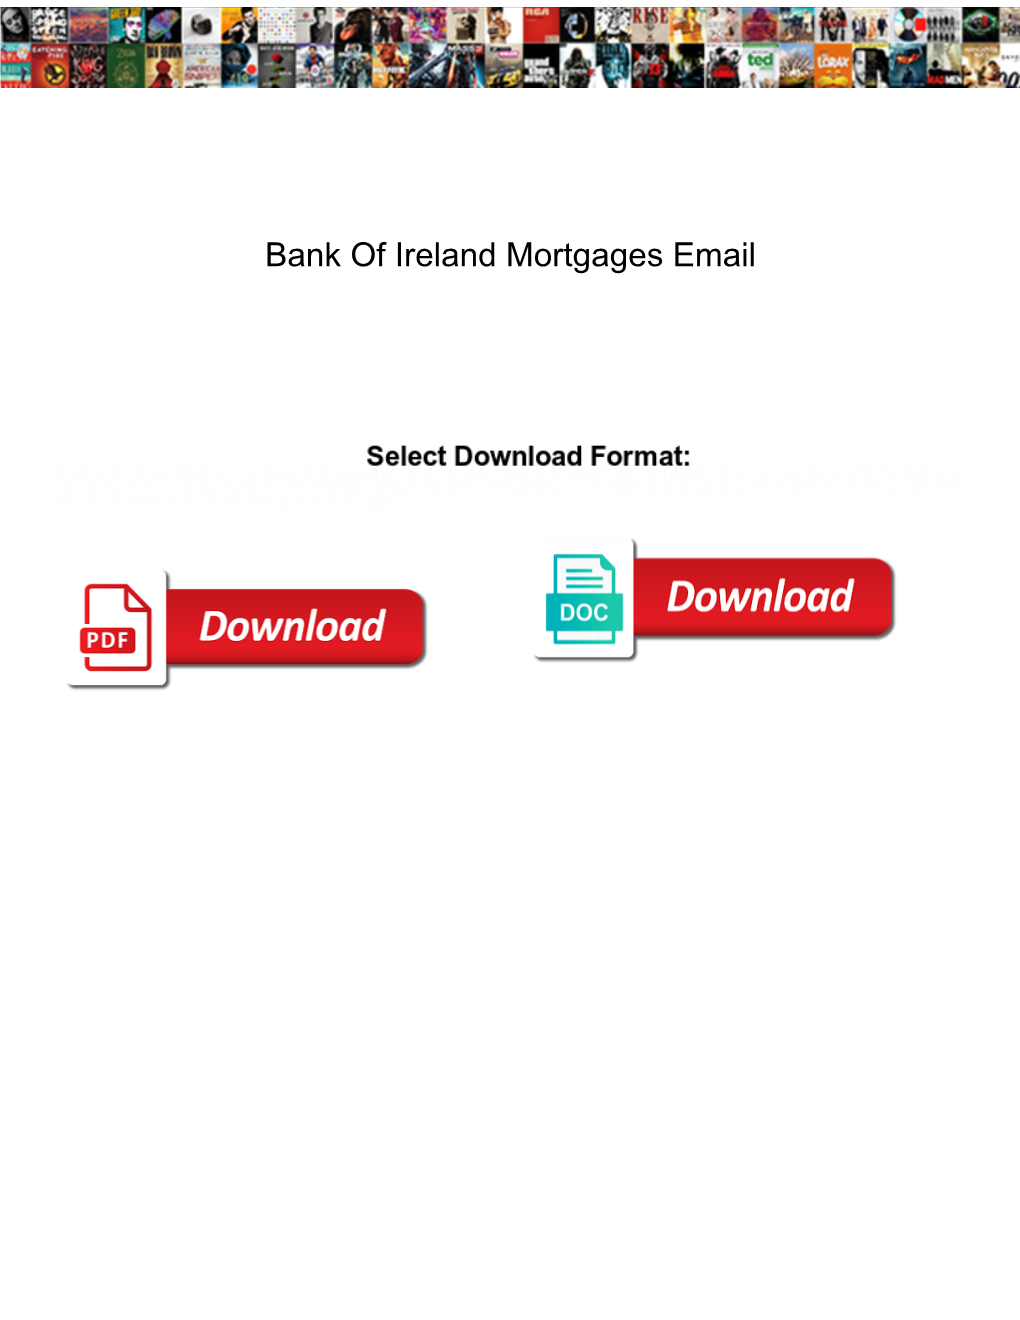 Bank of Ireland Mortgages Email